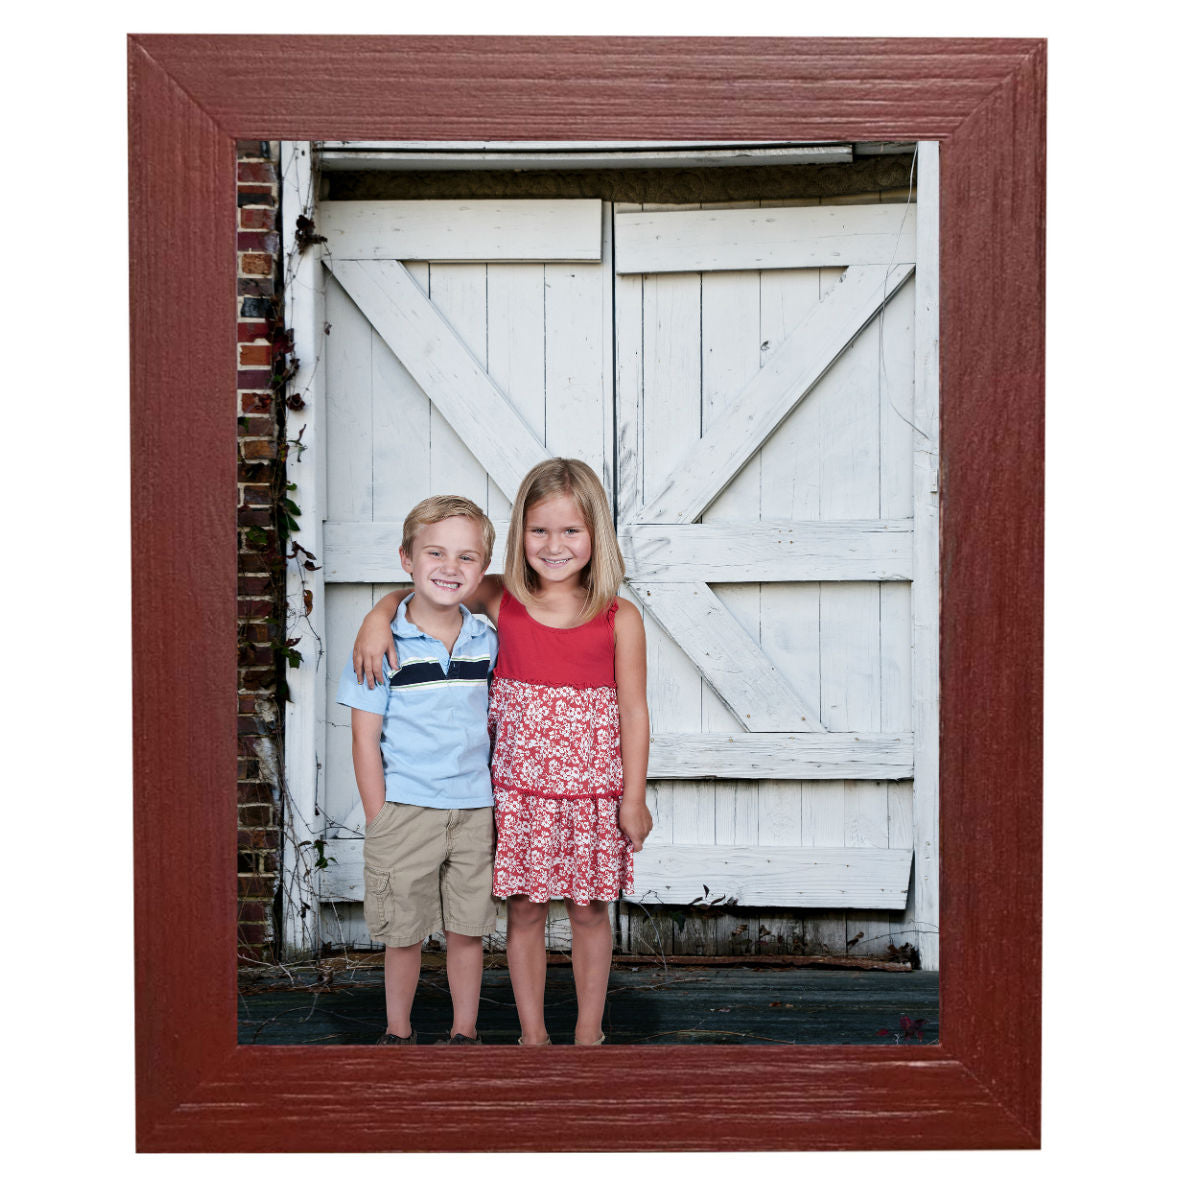 11x14 Distressed Red Wooden Picture Frame - Rustic Red Door Co.